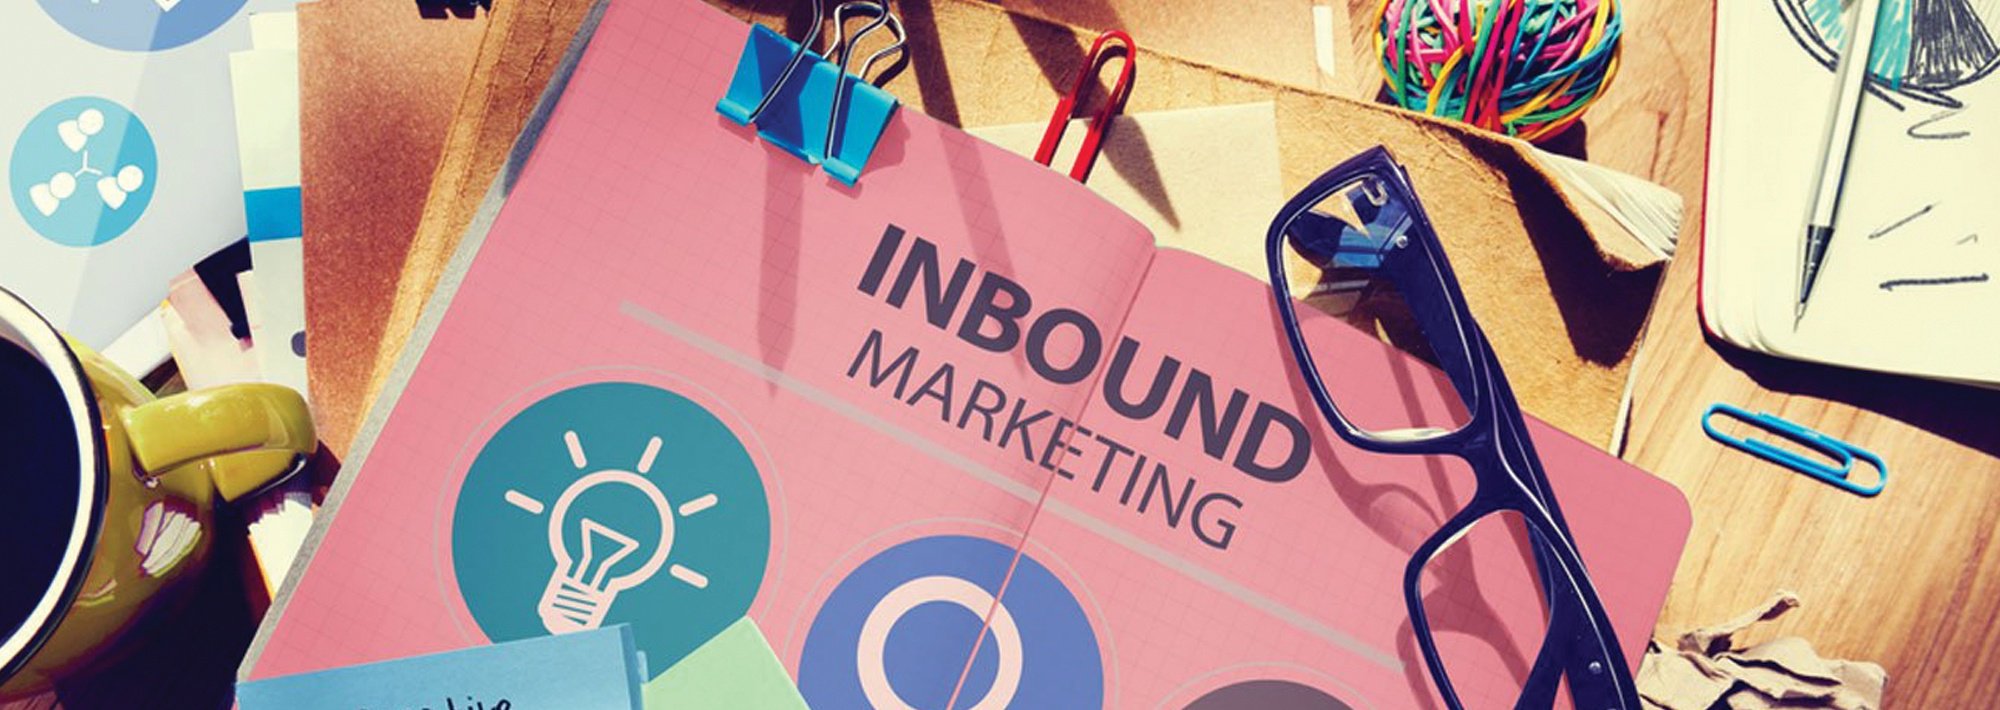 The Three Stages Of Inbound Marketing featured image